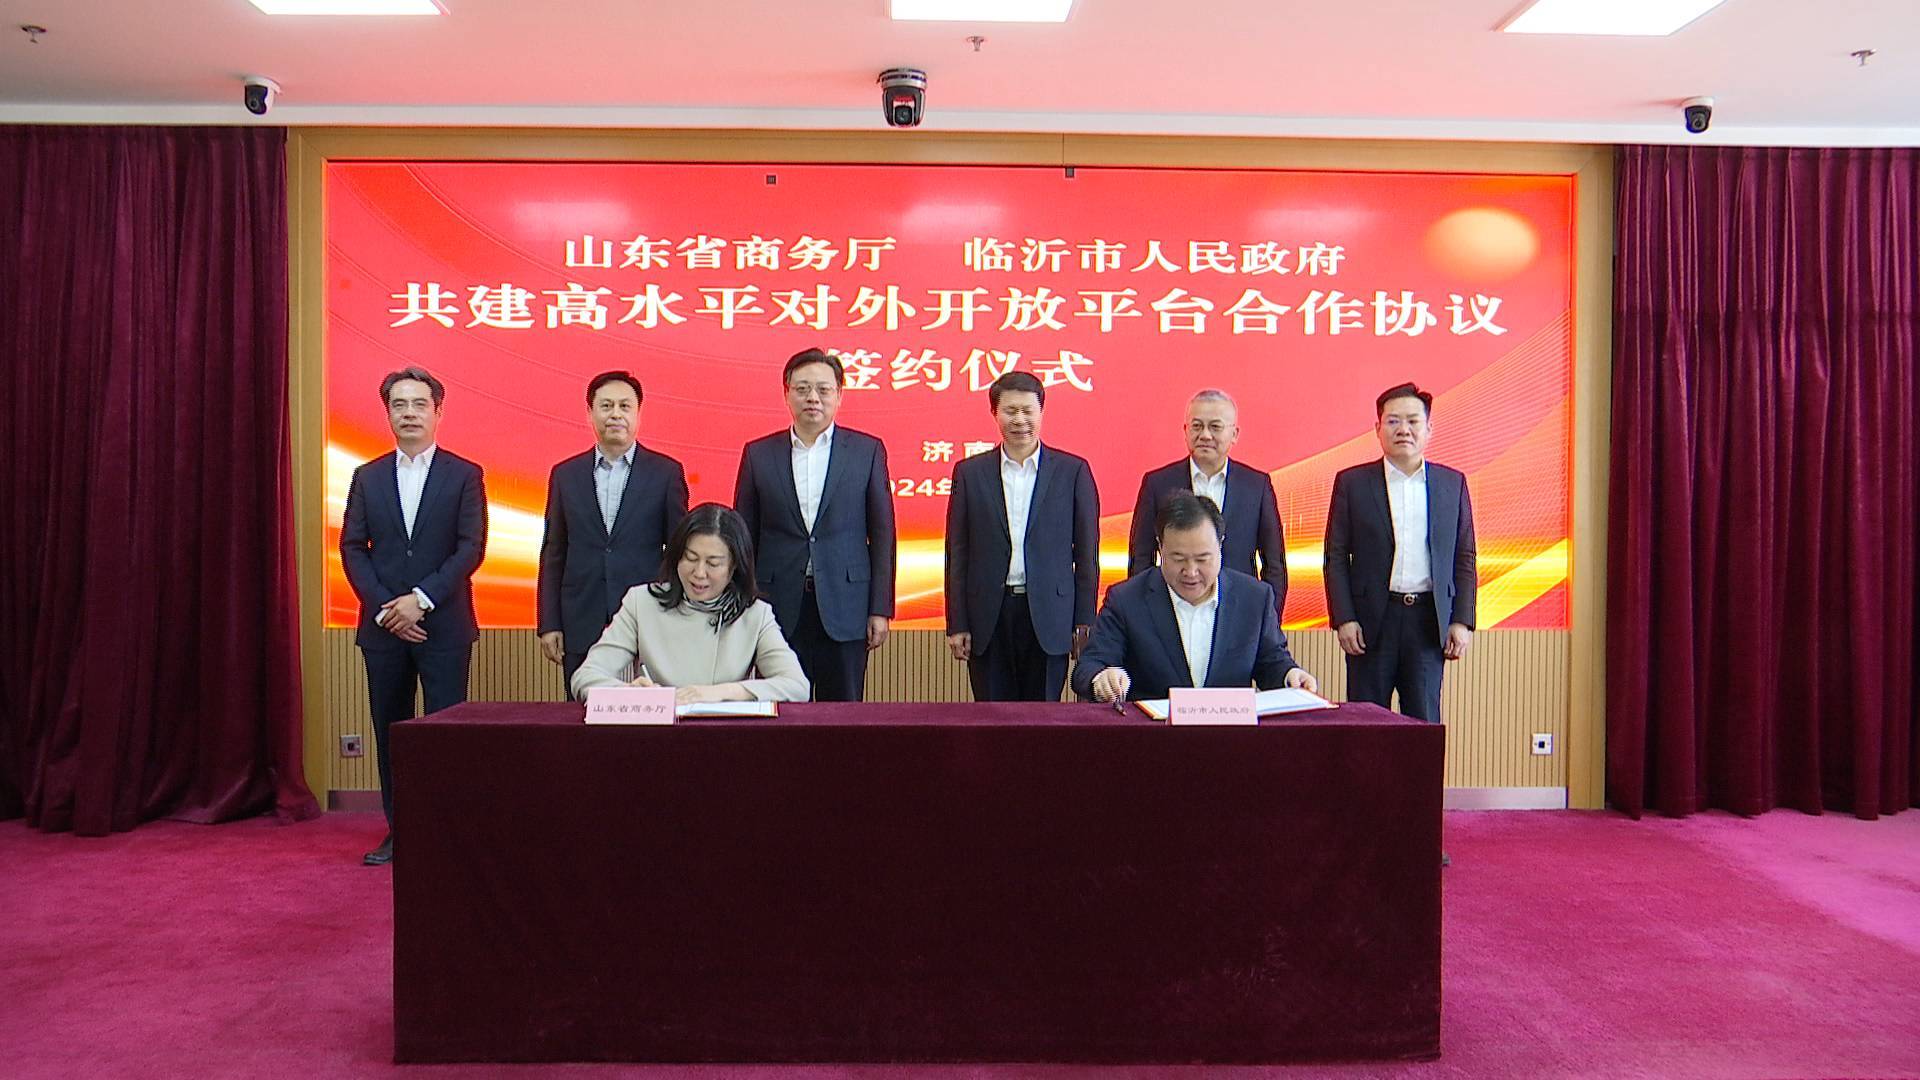  Business Vision: Shandong Provincial Department of Commerce and Linyi City jointly build a high-level platform for opening up and cooperation